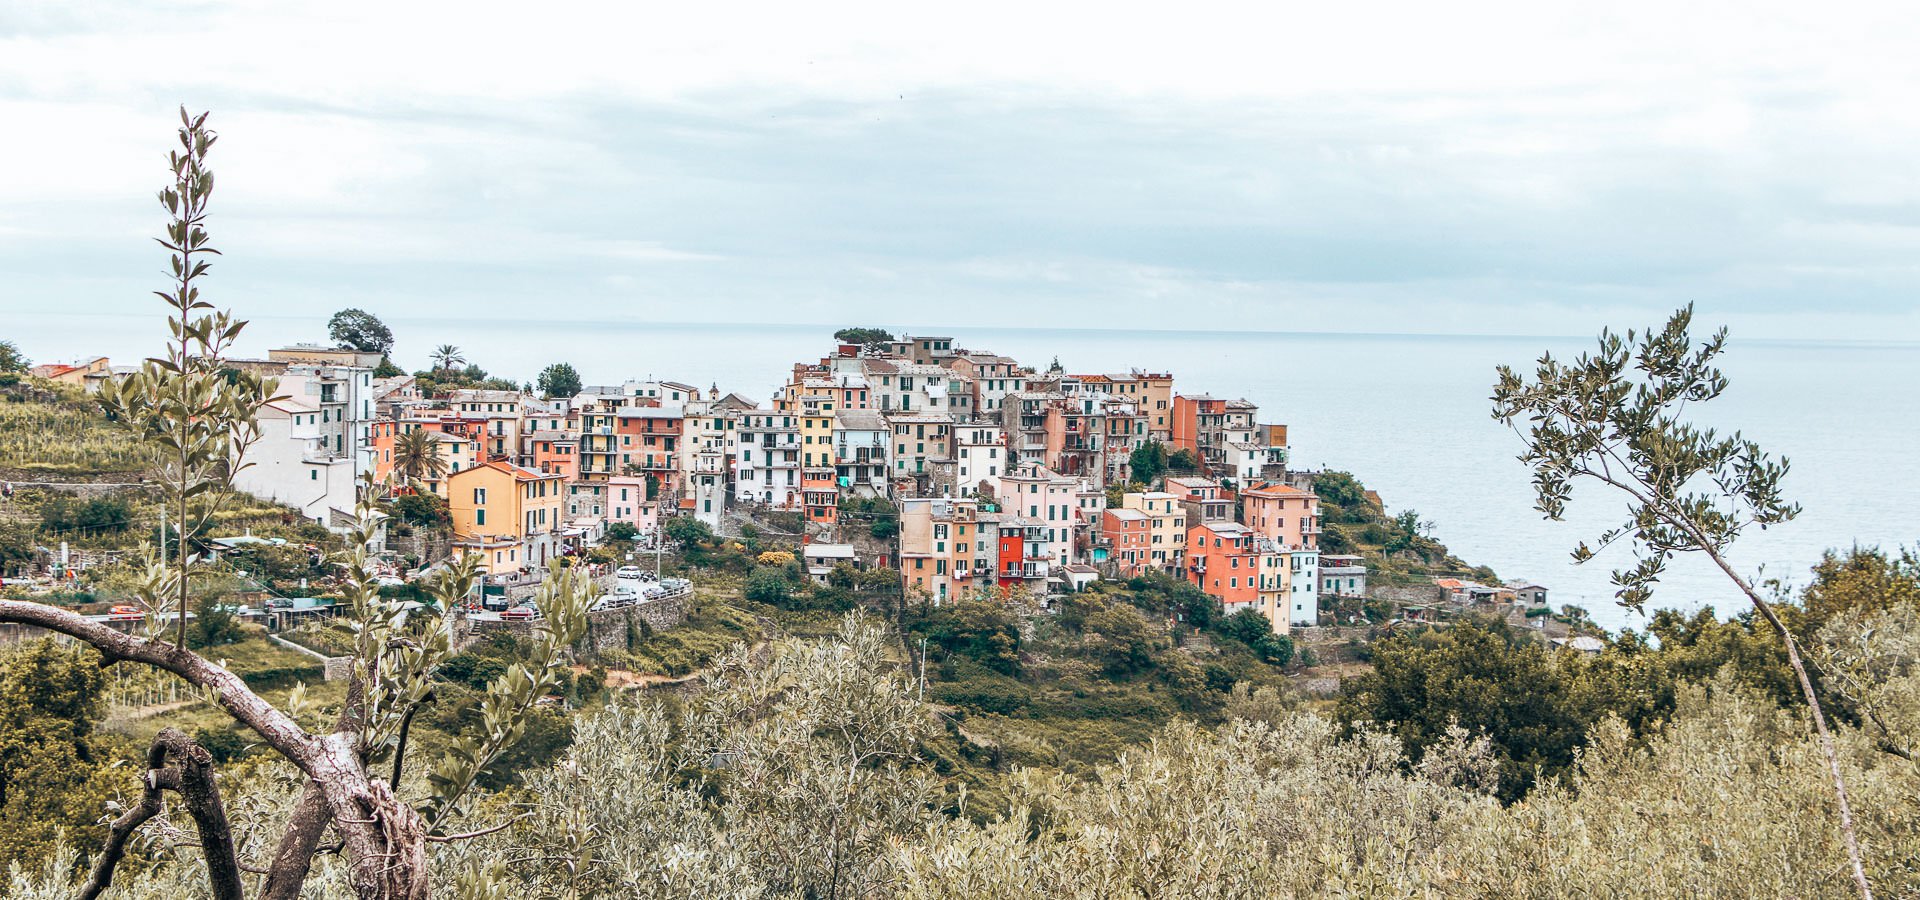 How To Spend 3 Days In Cinque Terre | London Markets You Need To Visit 5